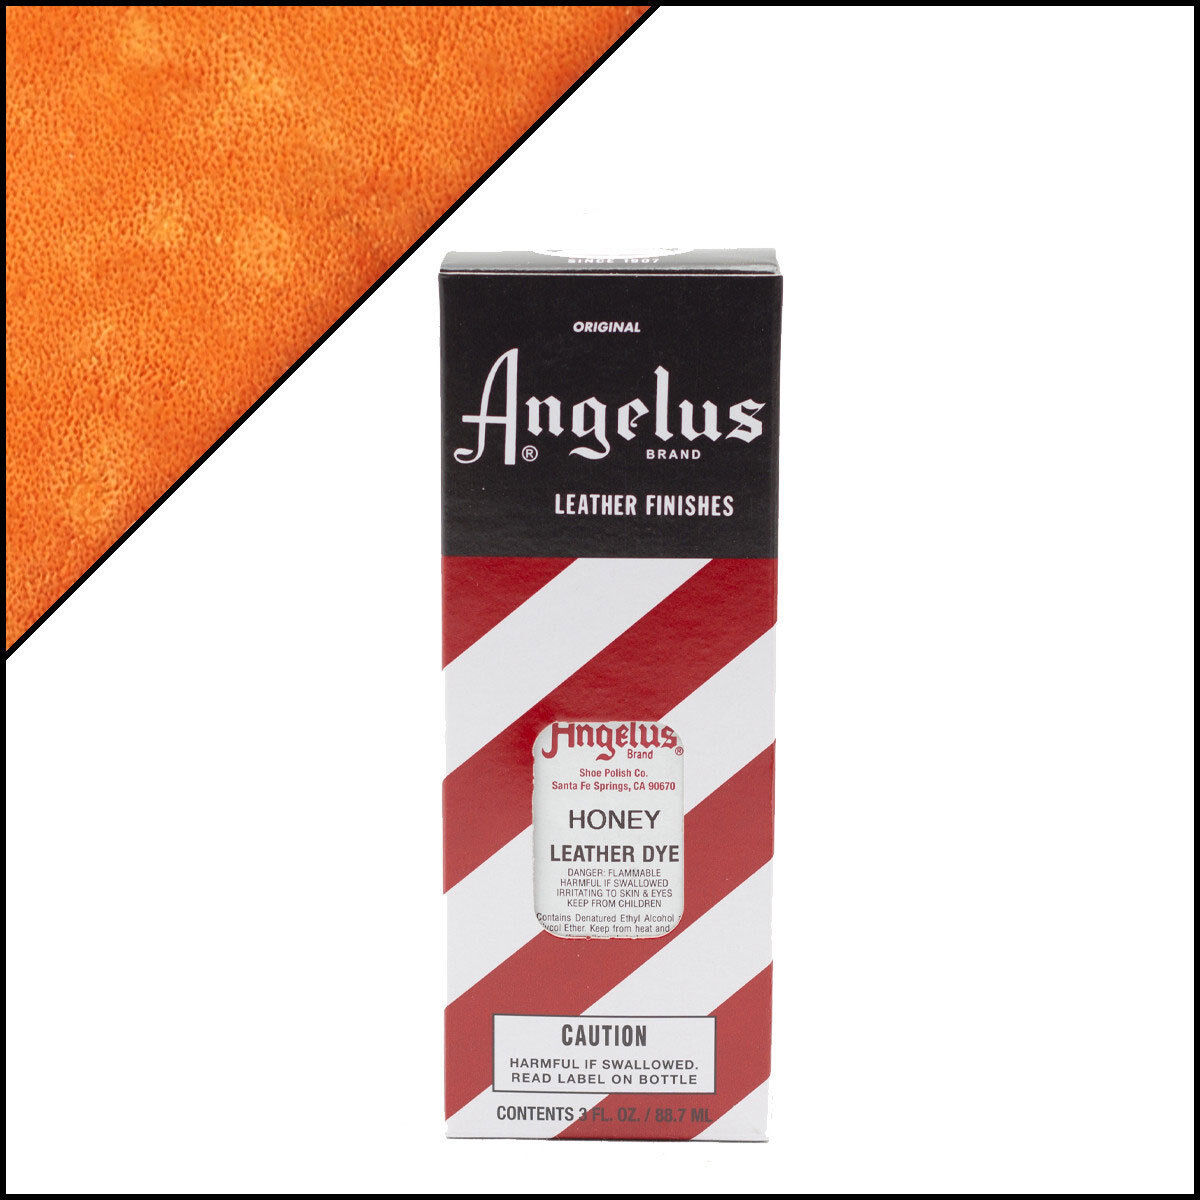 Angelus Leather Special sale item Max 63% OFF Dye Honey